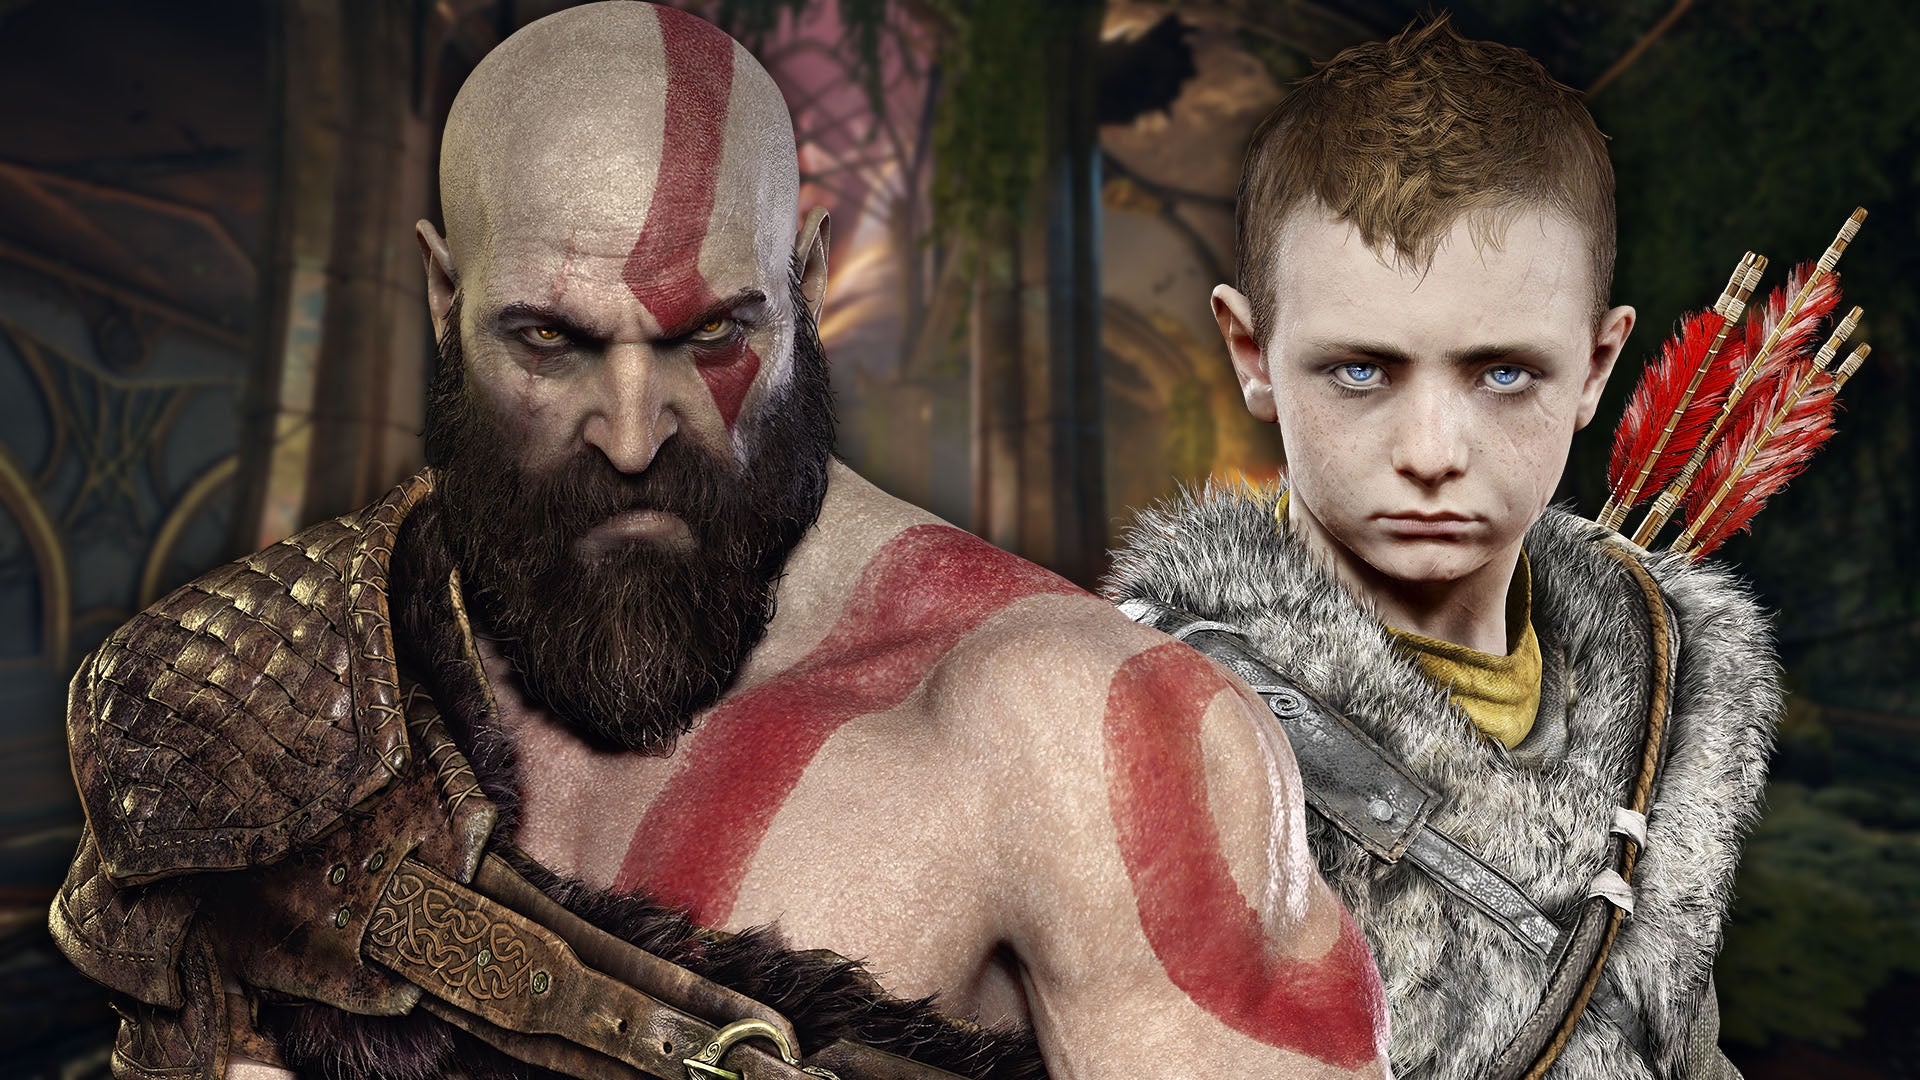 Image for God of War on PC - Digital Foundry Tech Review - PlayStation vs PC, Performance, Optimised Settings!